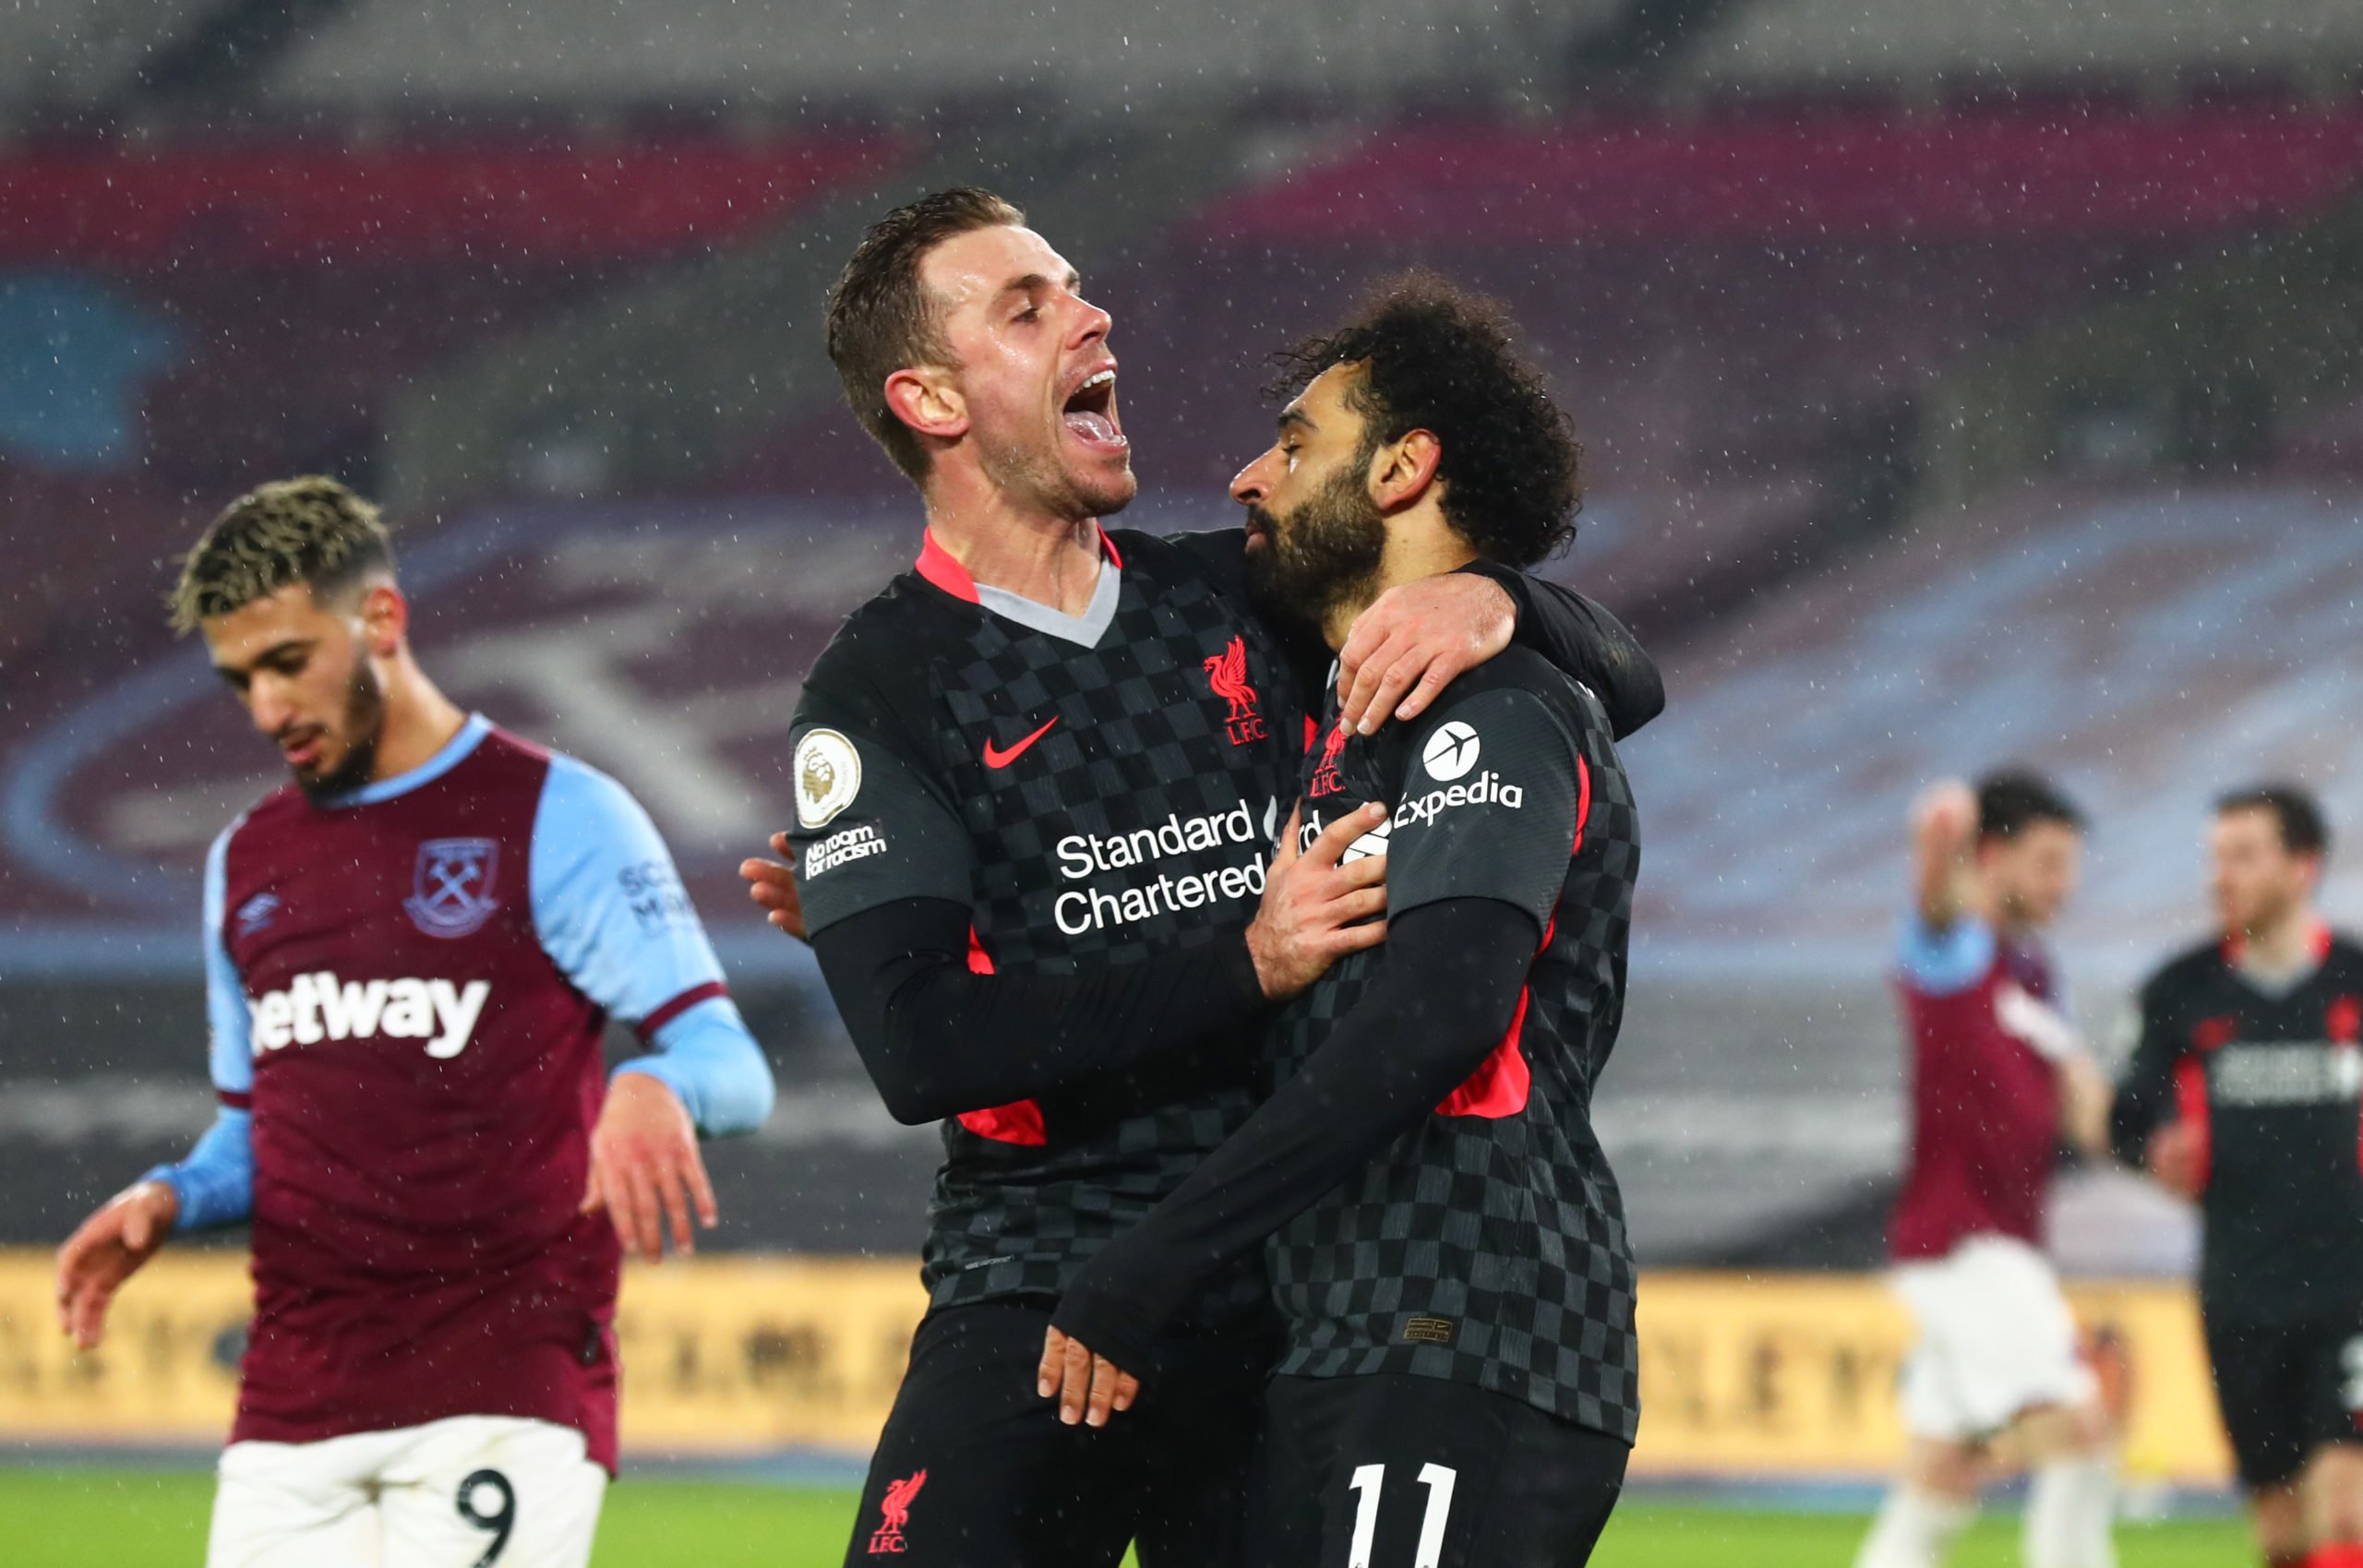 Mohamed Salah of Liverpool celebrates with teammate Jordan Henderson after scoring their side's second goal during the Premier League match between West Ham United and Liverpool at London Stadium on January 31, 2021 in London, England. Sporting stadiums around the UK remain under strict restrictions due to the Coronavirus Pandemic as Government social distancing laws prohibit fans inside venues resulting in games being played behind closed doors. (Photo by Clive Rose/Getty Images)